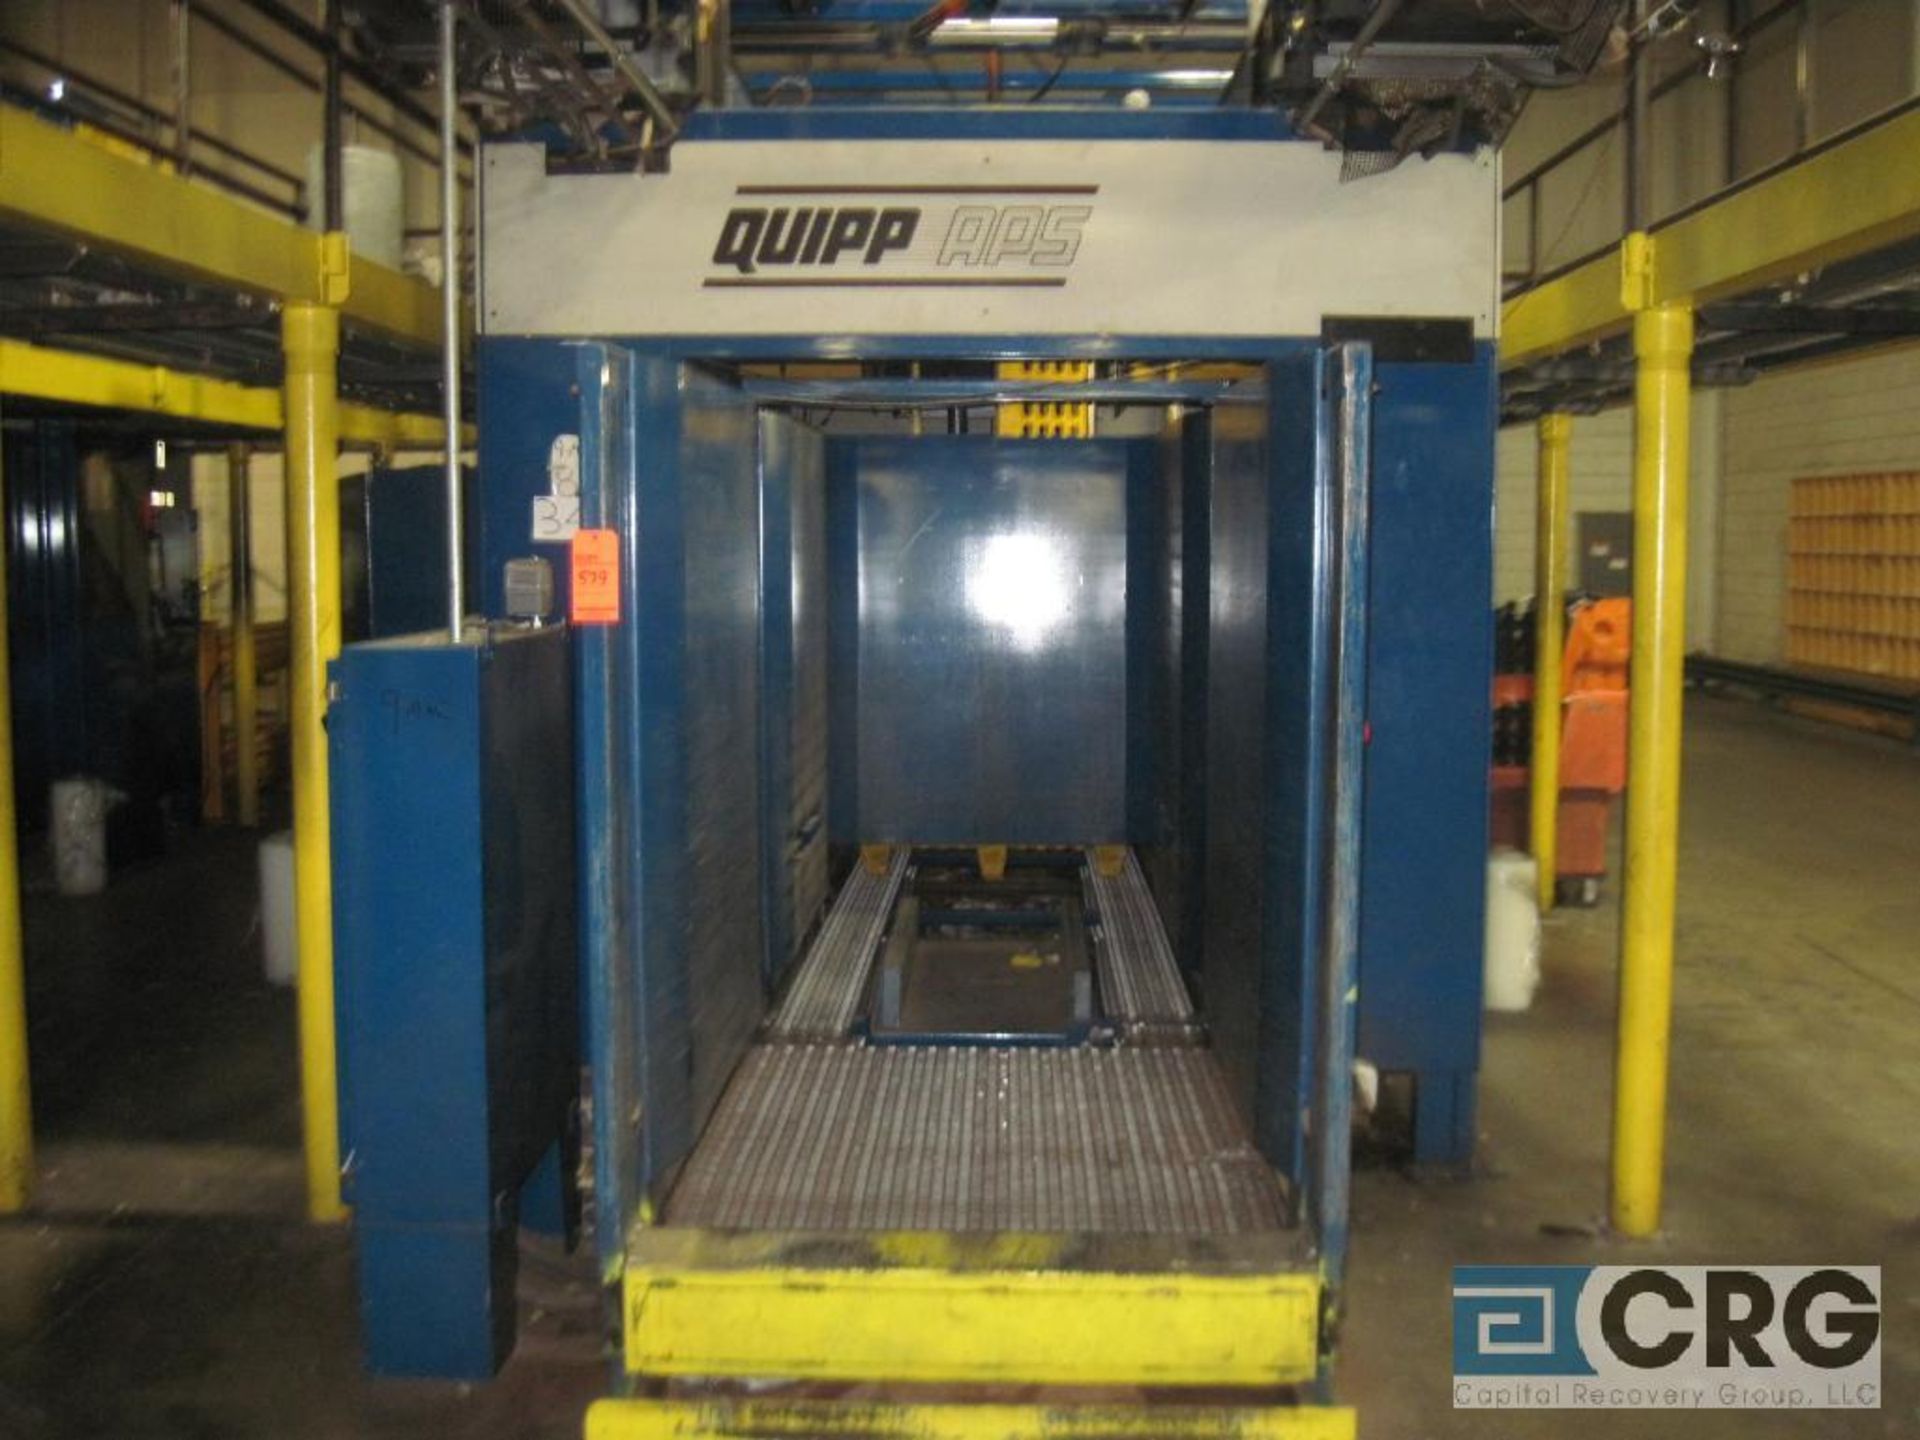 2004 Quipp automatic newspaper palletizer with PLC controls - Image 4 of 6